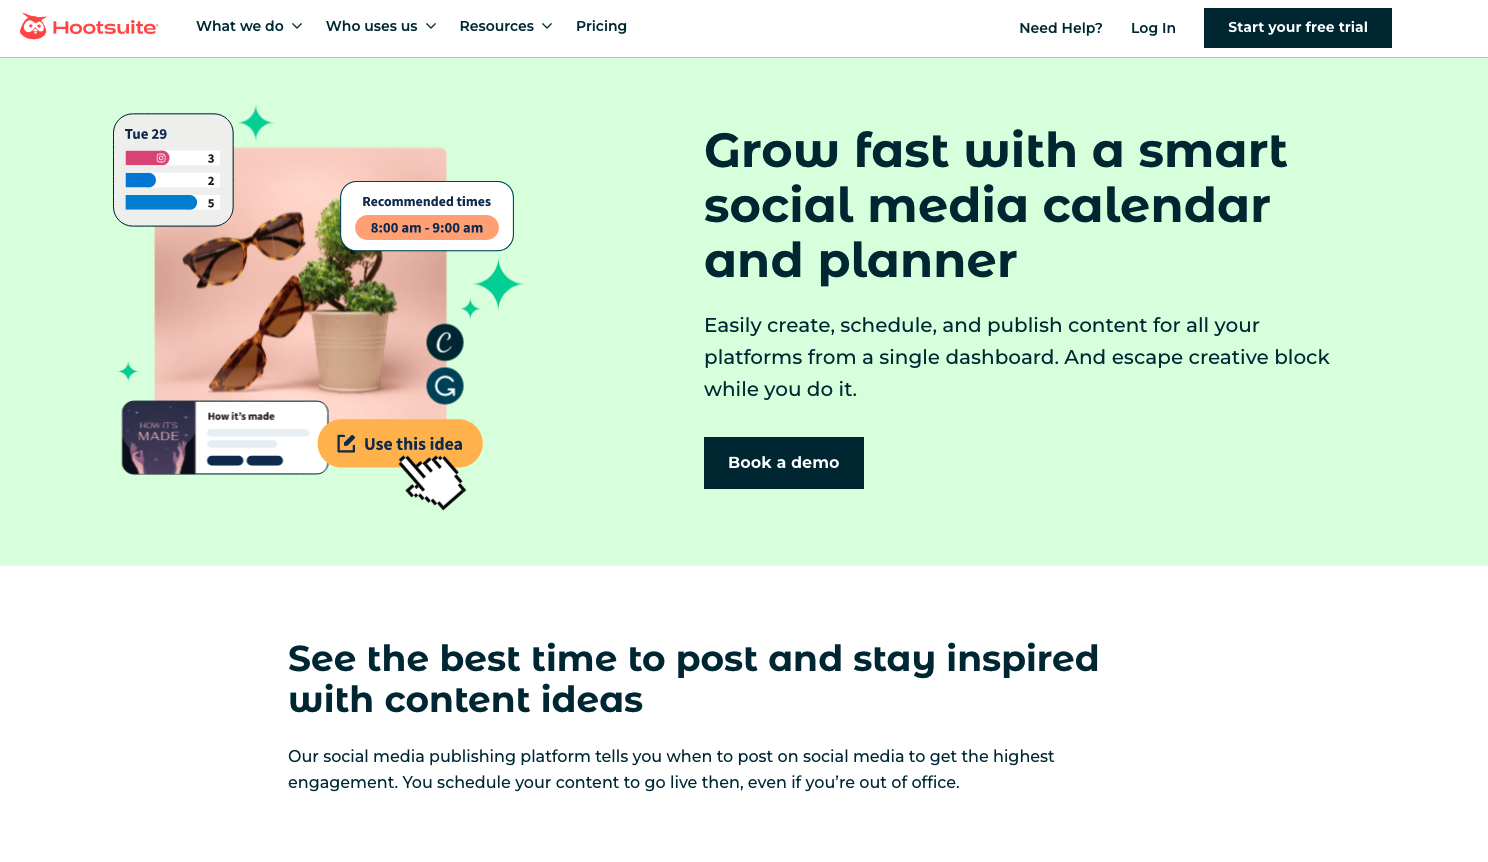 The image displays a landing page for Hootsuite discussing how you can grow your social media channels fast using a smart calendar and planner.